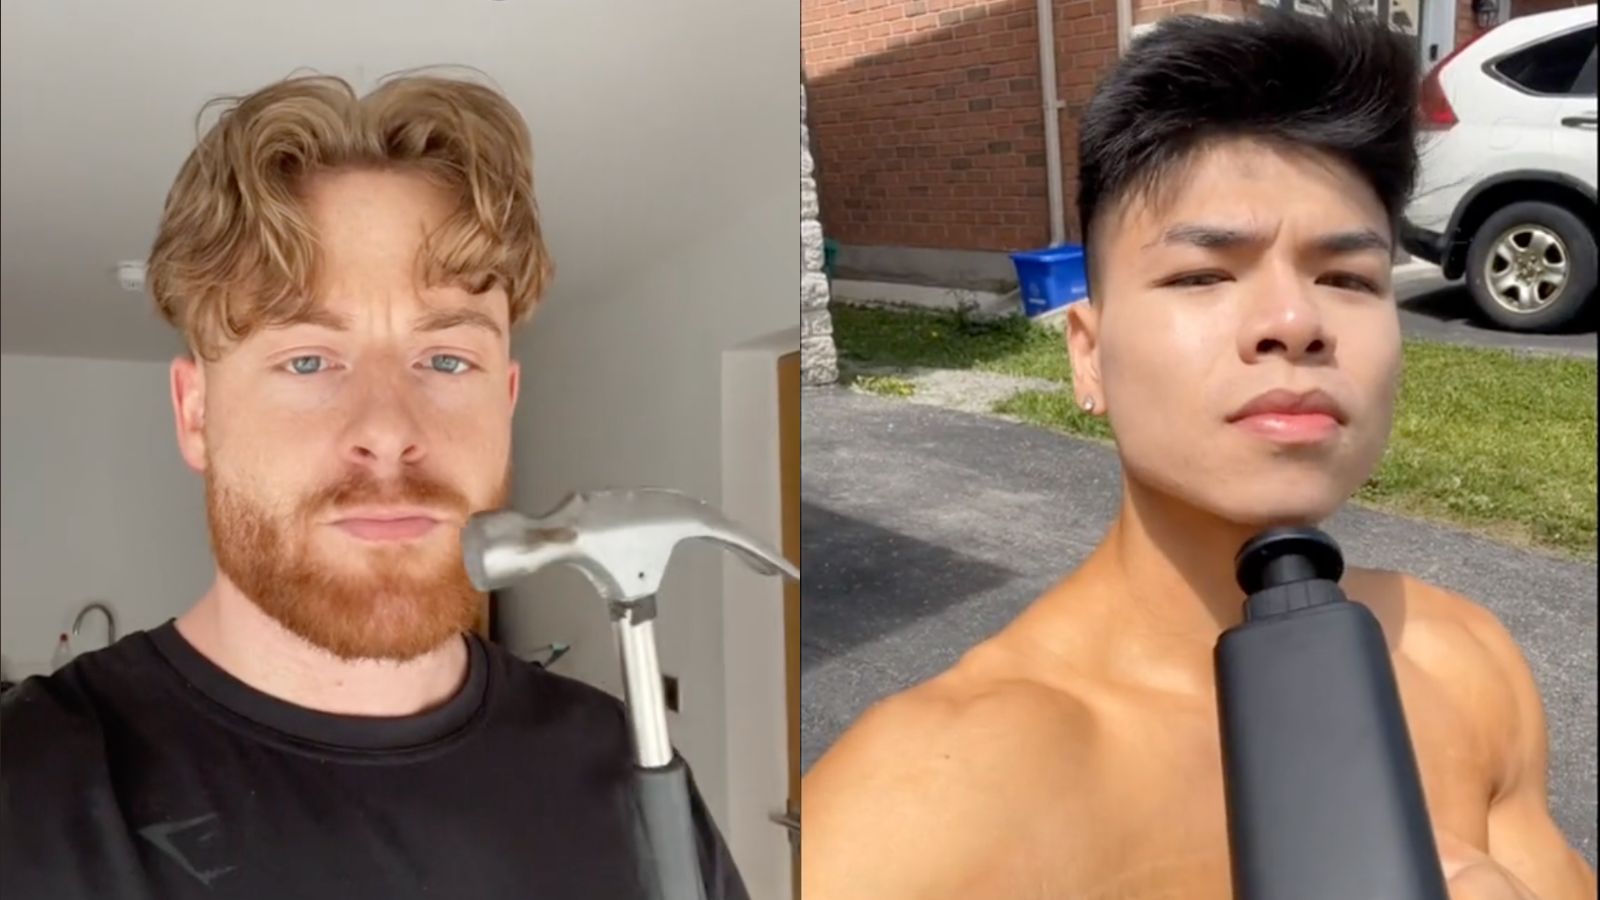 Beware of the Controversial ‘Bone Smashing’ Trend on TikTok: What You Need to Know